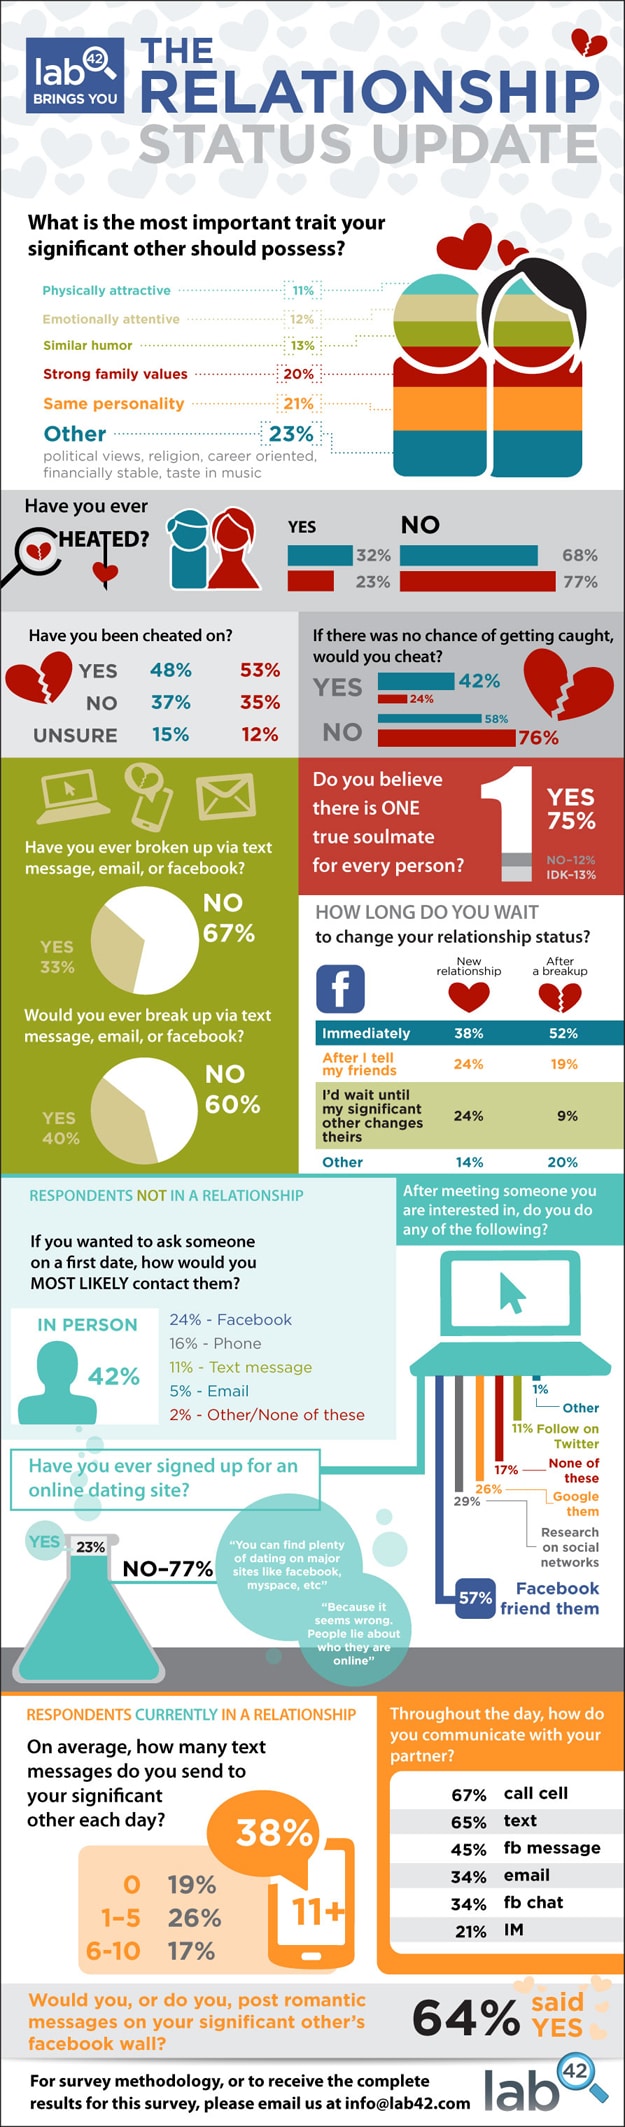 Online Dating: The Relationship Status Update [Infographic]